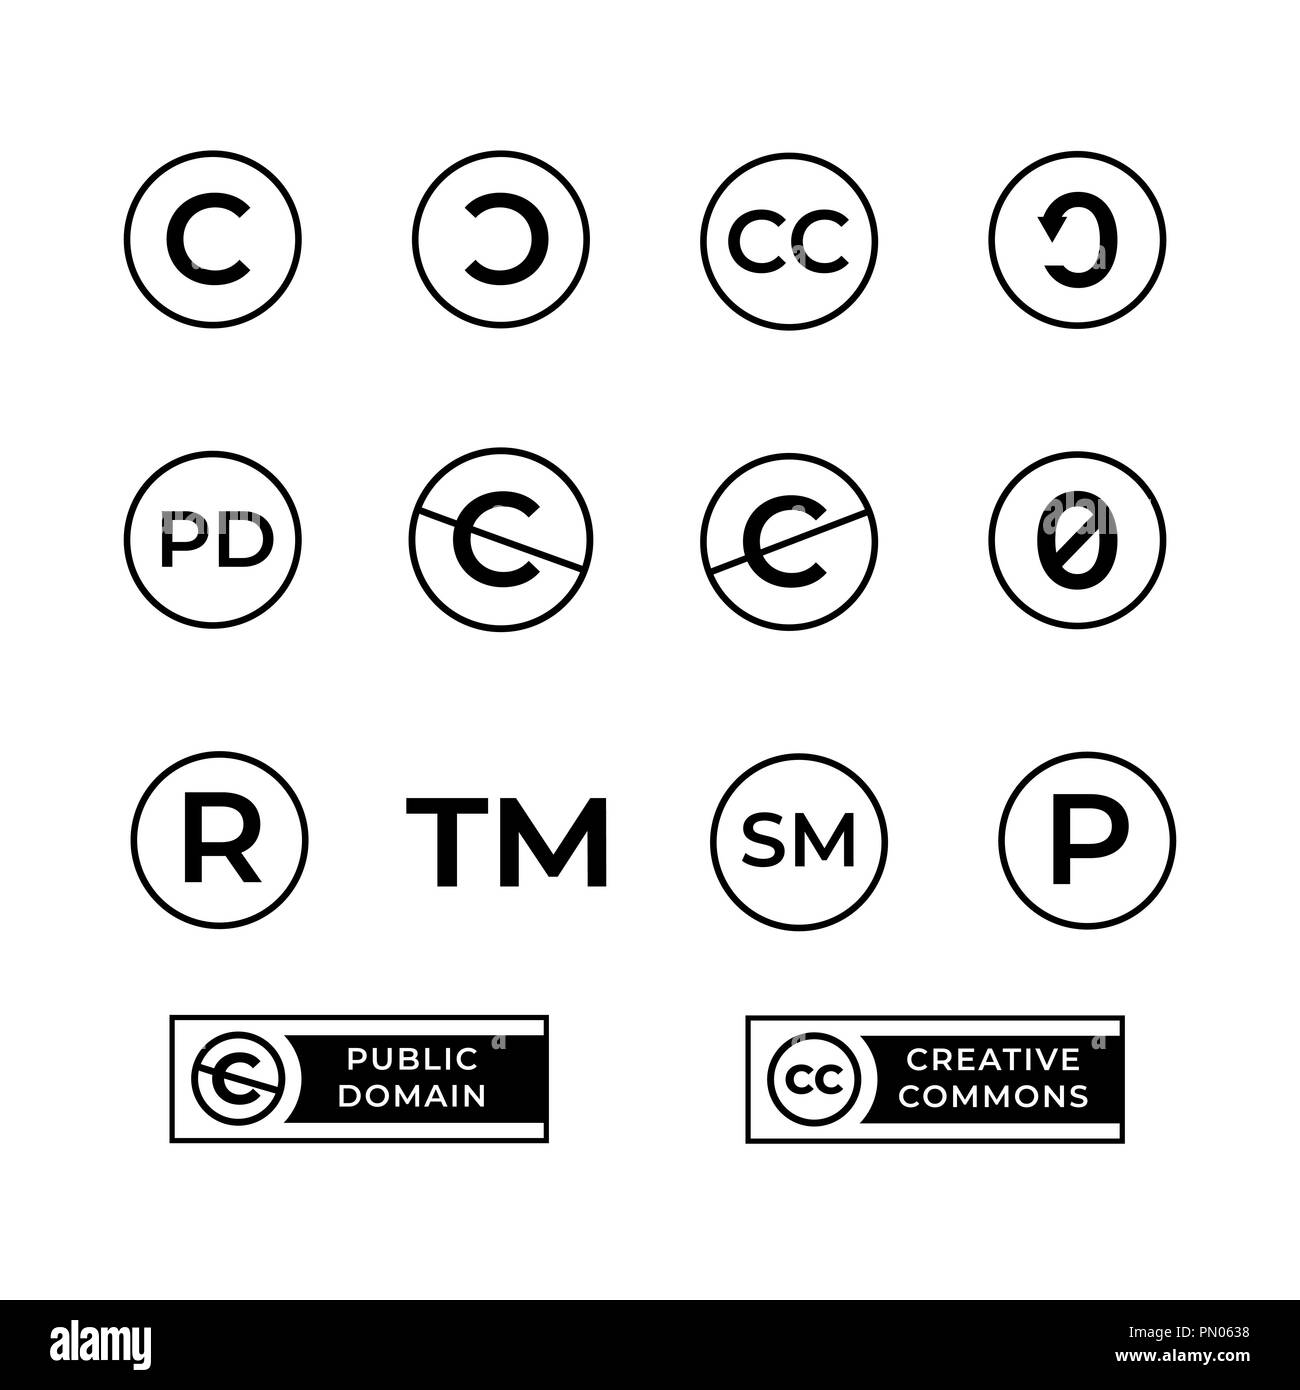 Different copyright icons set with creative commons and public domain signs Stock Vector